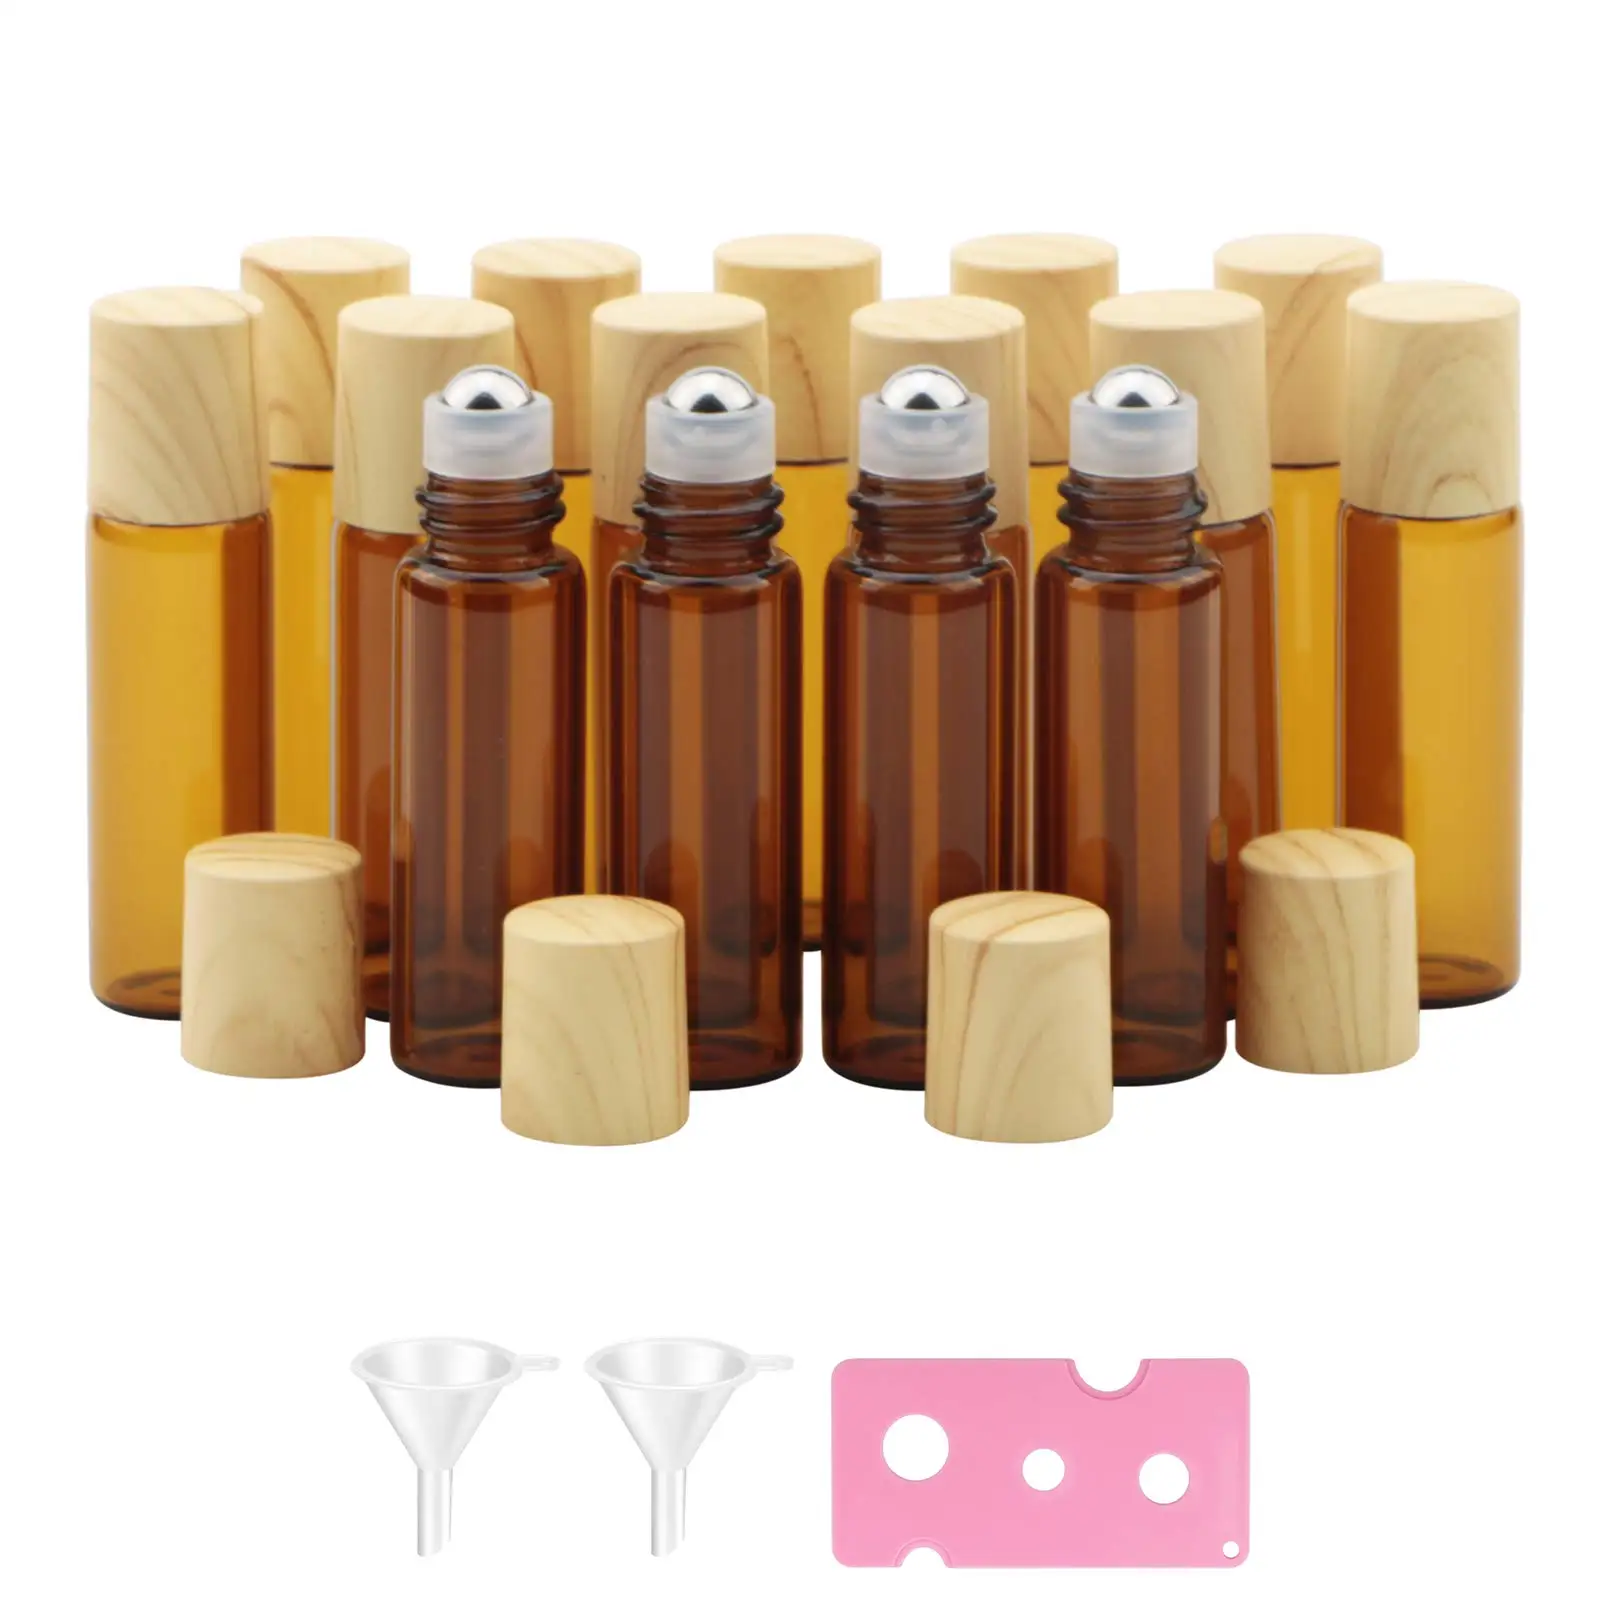 Oil Roller Bottle with Stainless Steel Roller Ball and Wood Grain Lid for Essential Oil Aromatherapy Perfume Cosmetic